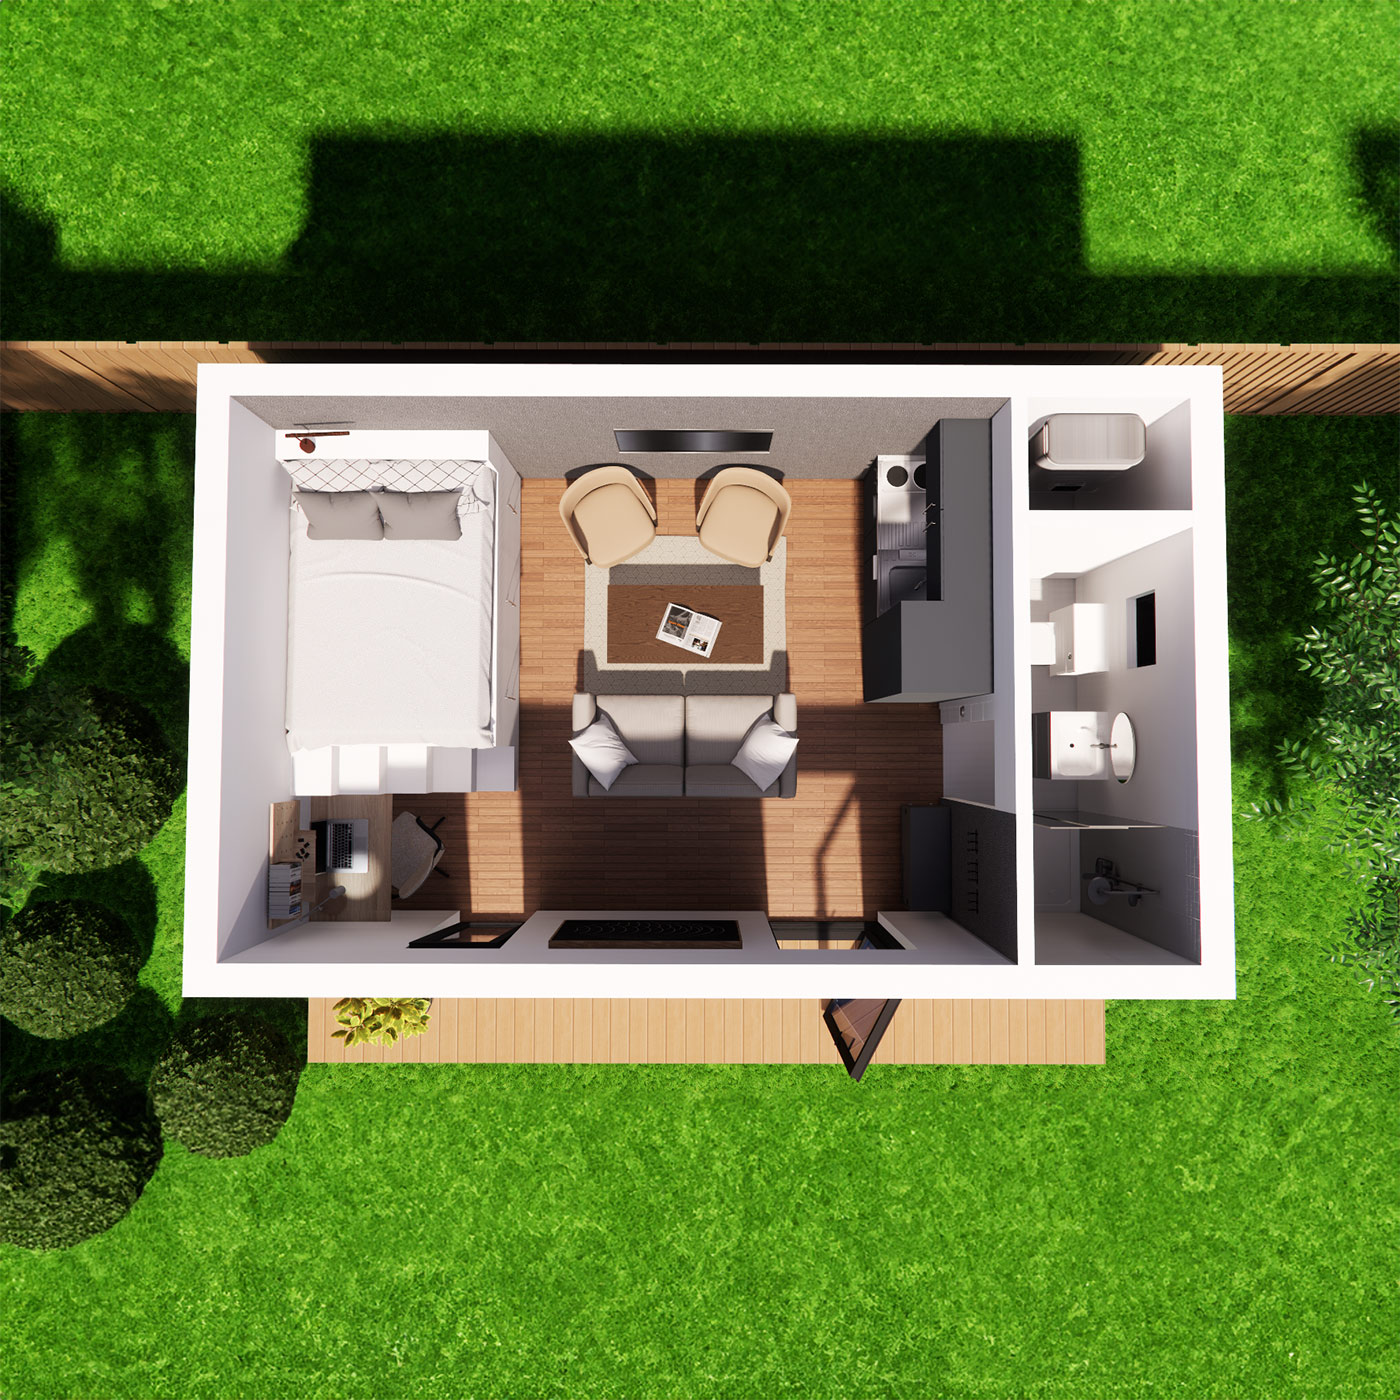 Visualisation of mobile home floorplan with interior design 3.9m by 6.2m